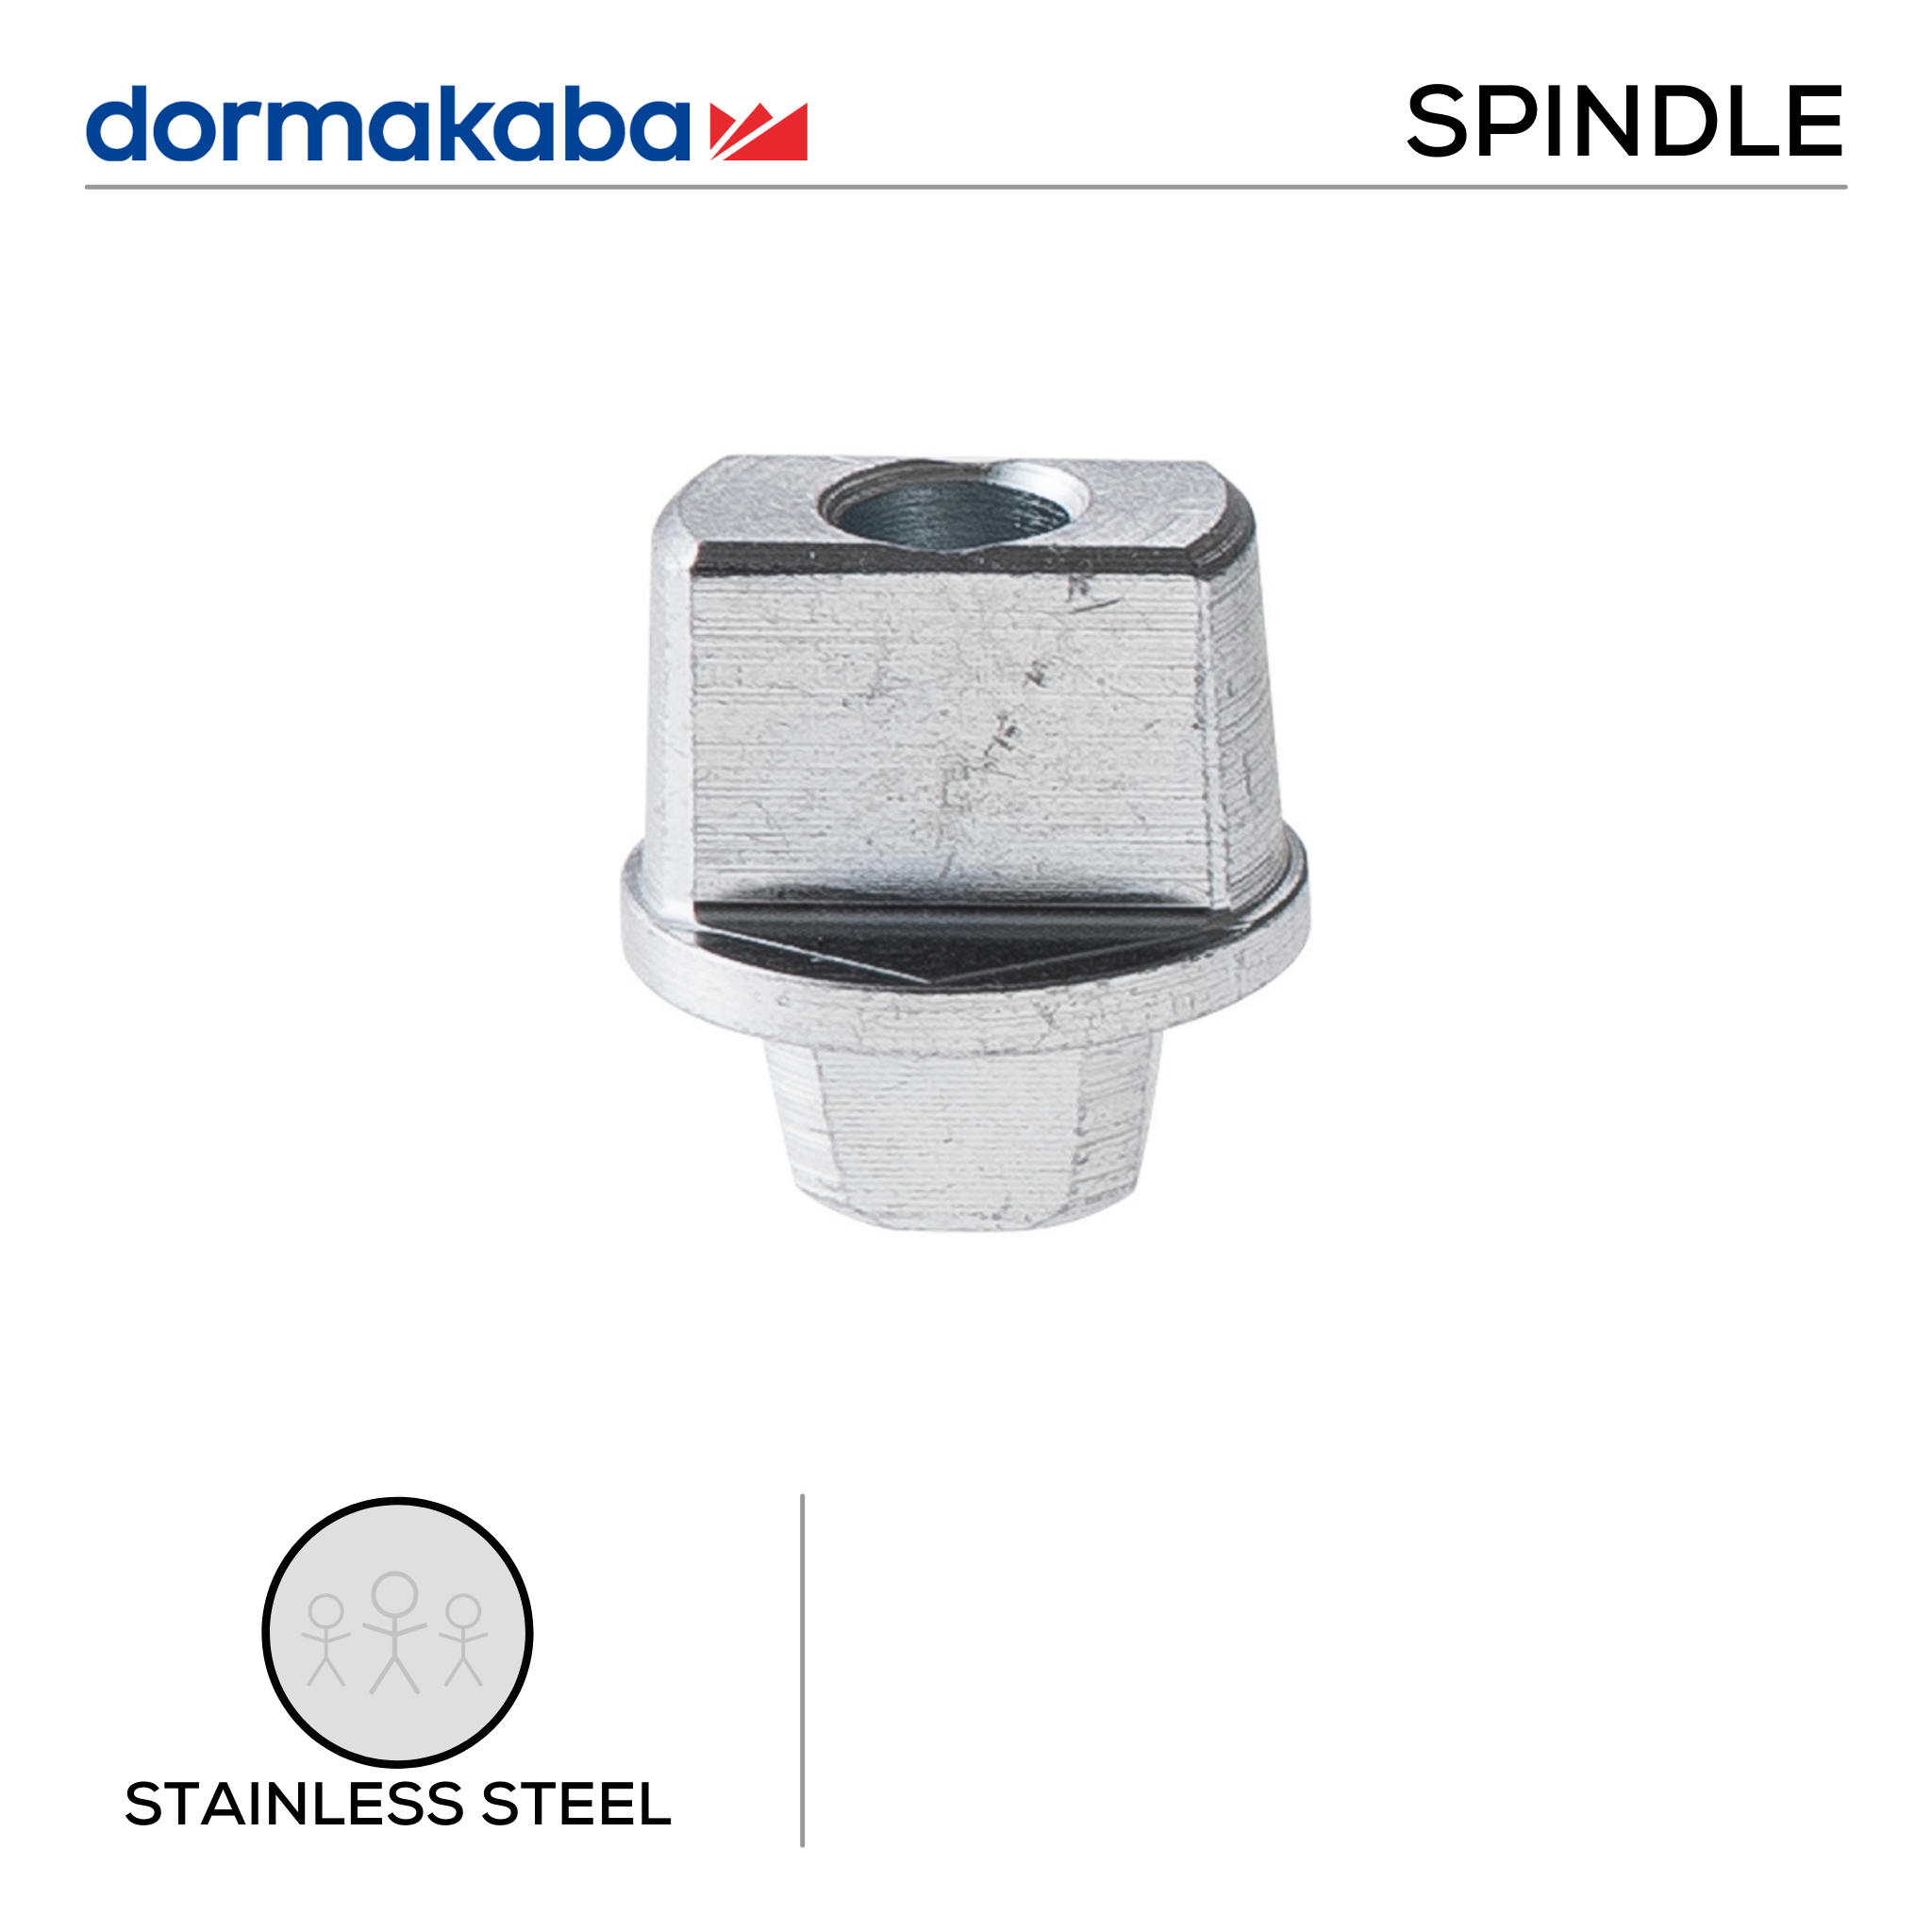 SPINDLE, Spindle, Standard, Stainless Steel, DORMAKABA